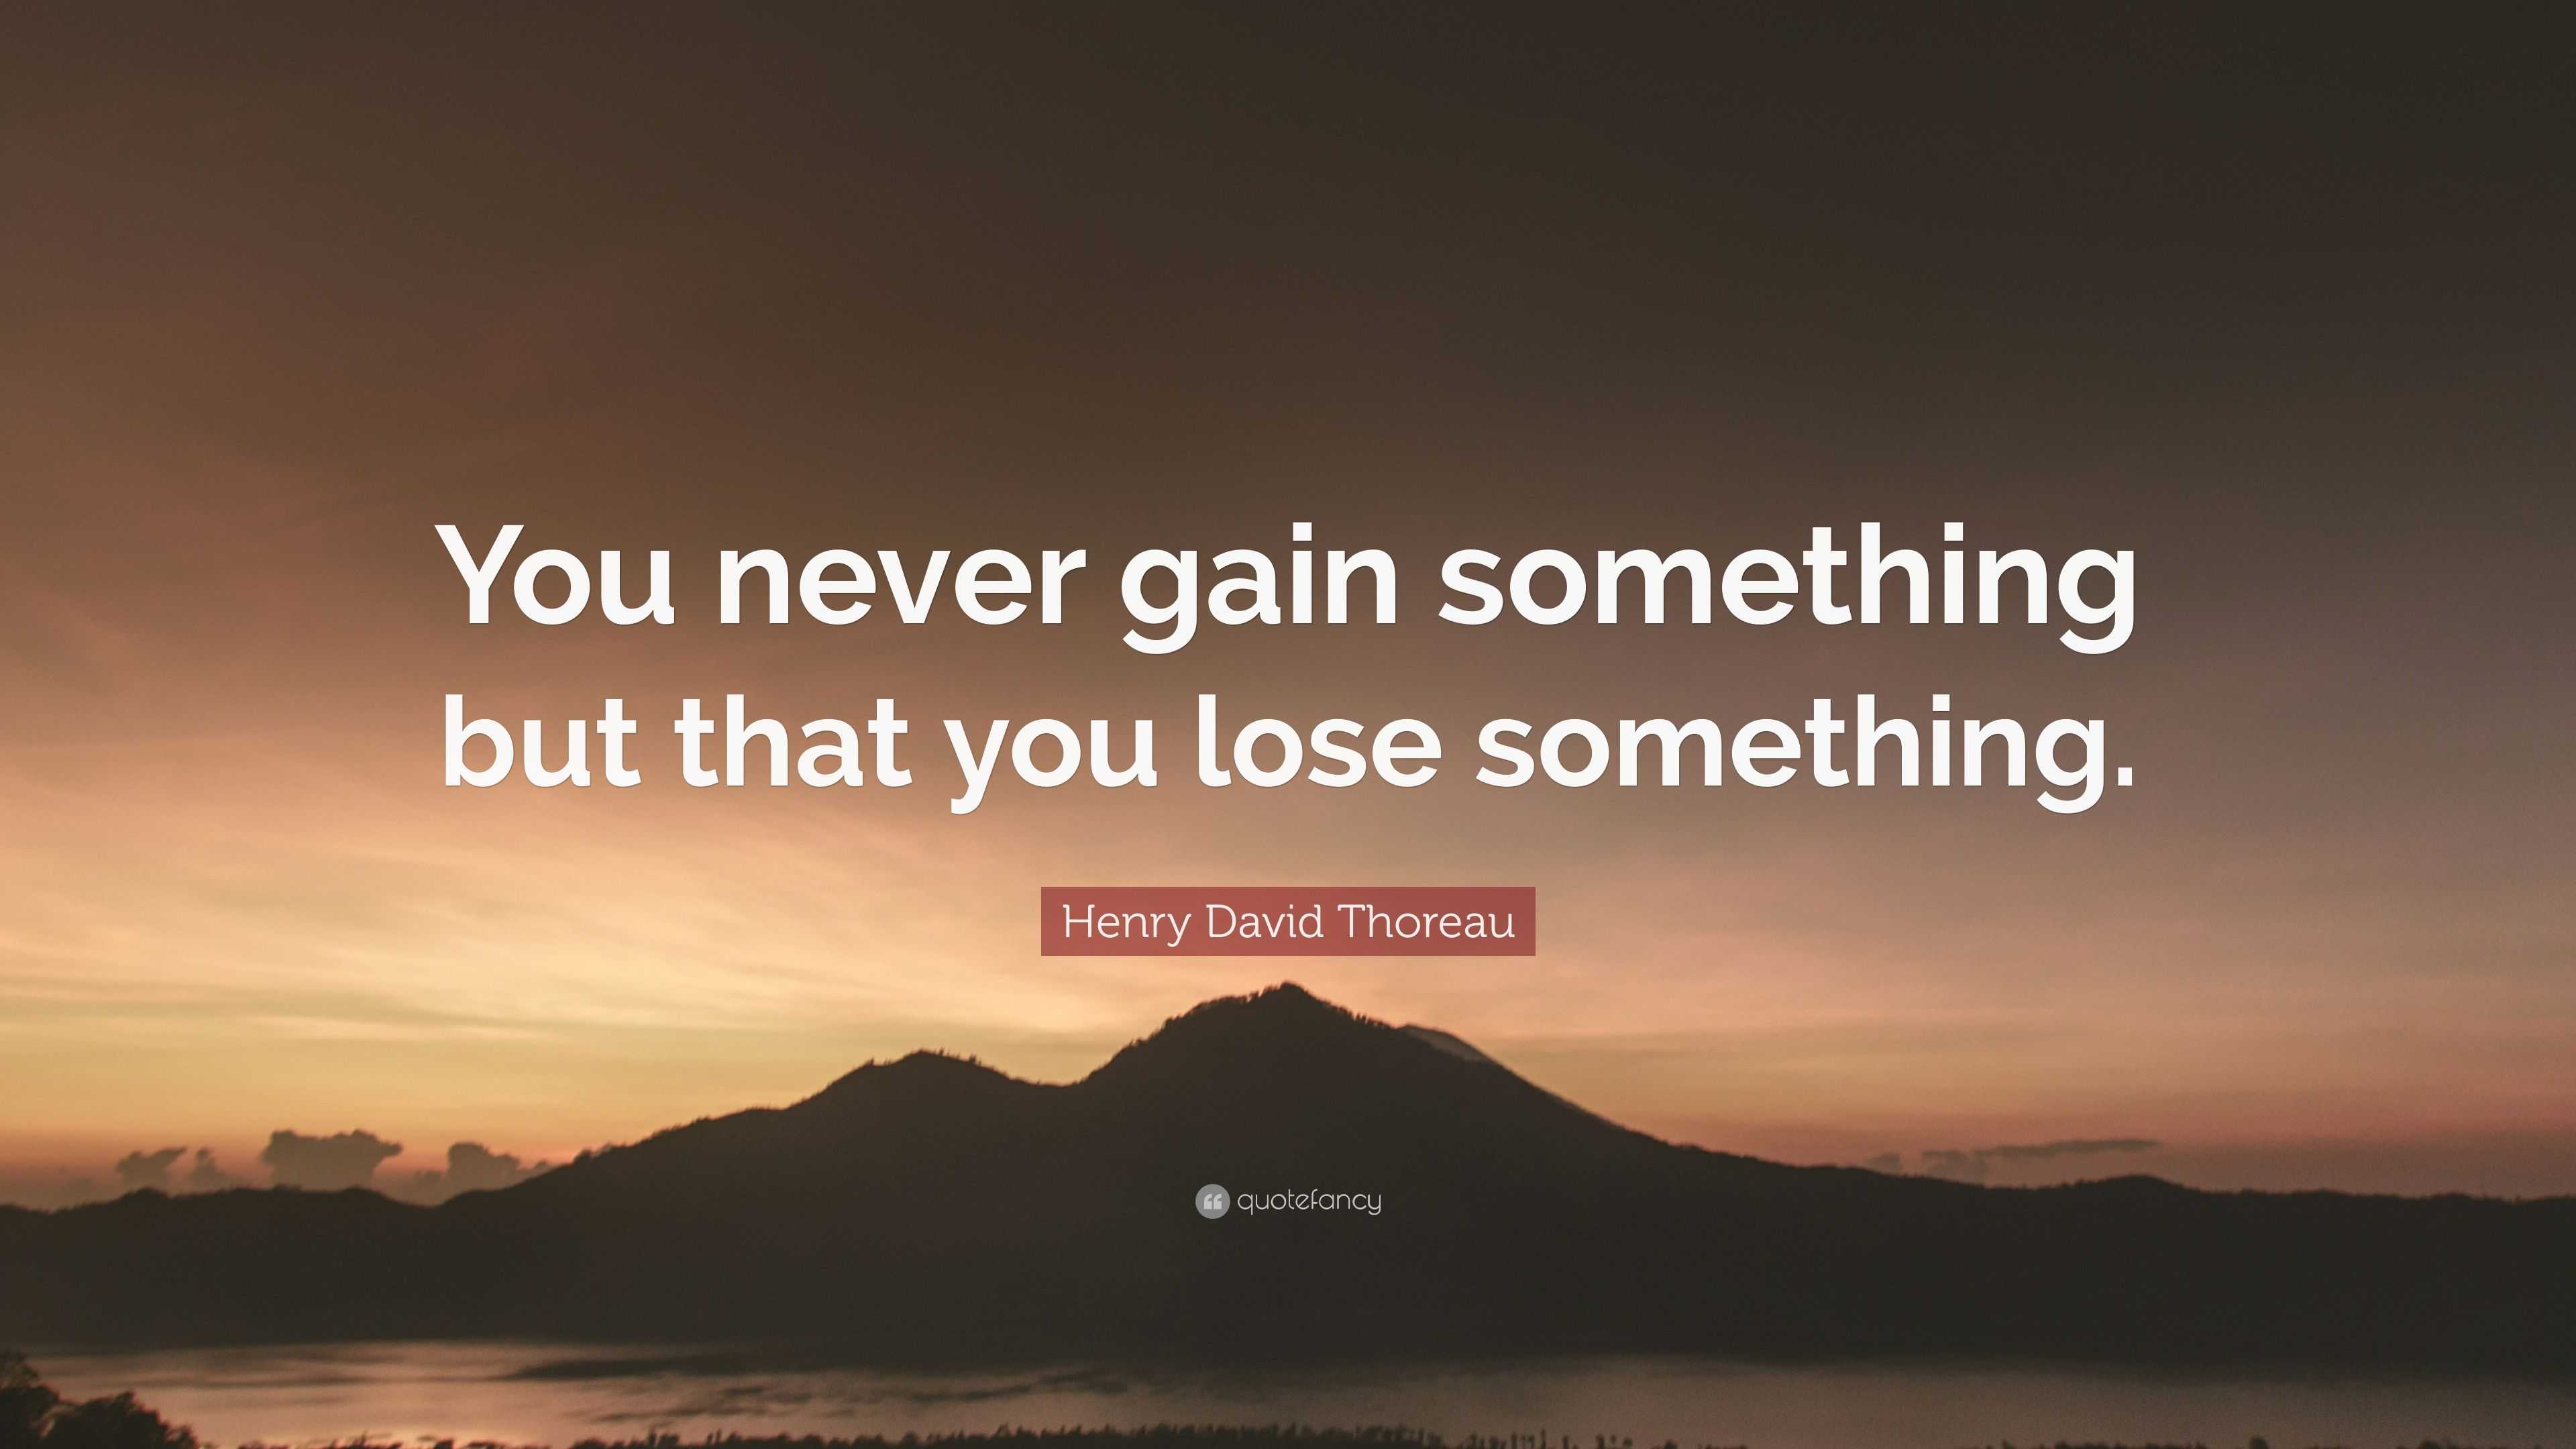 Henry David Thoreau Quote “you Never Gain Something But That You Lose Something” 